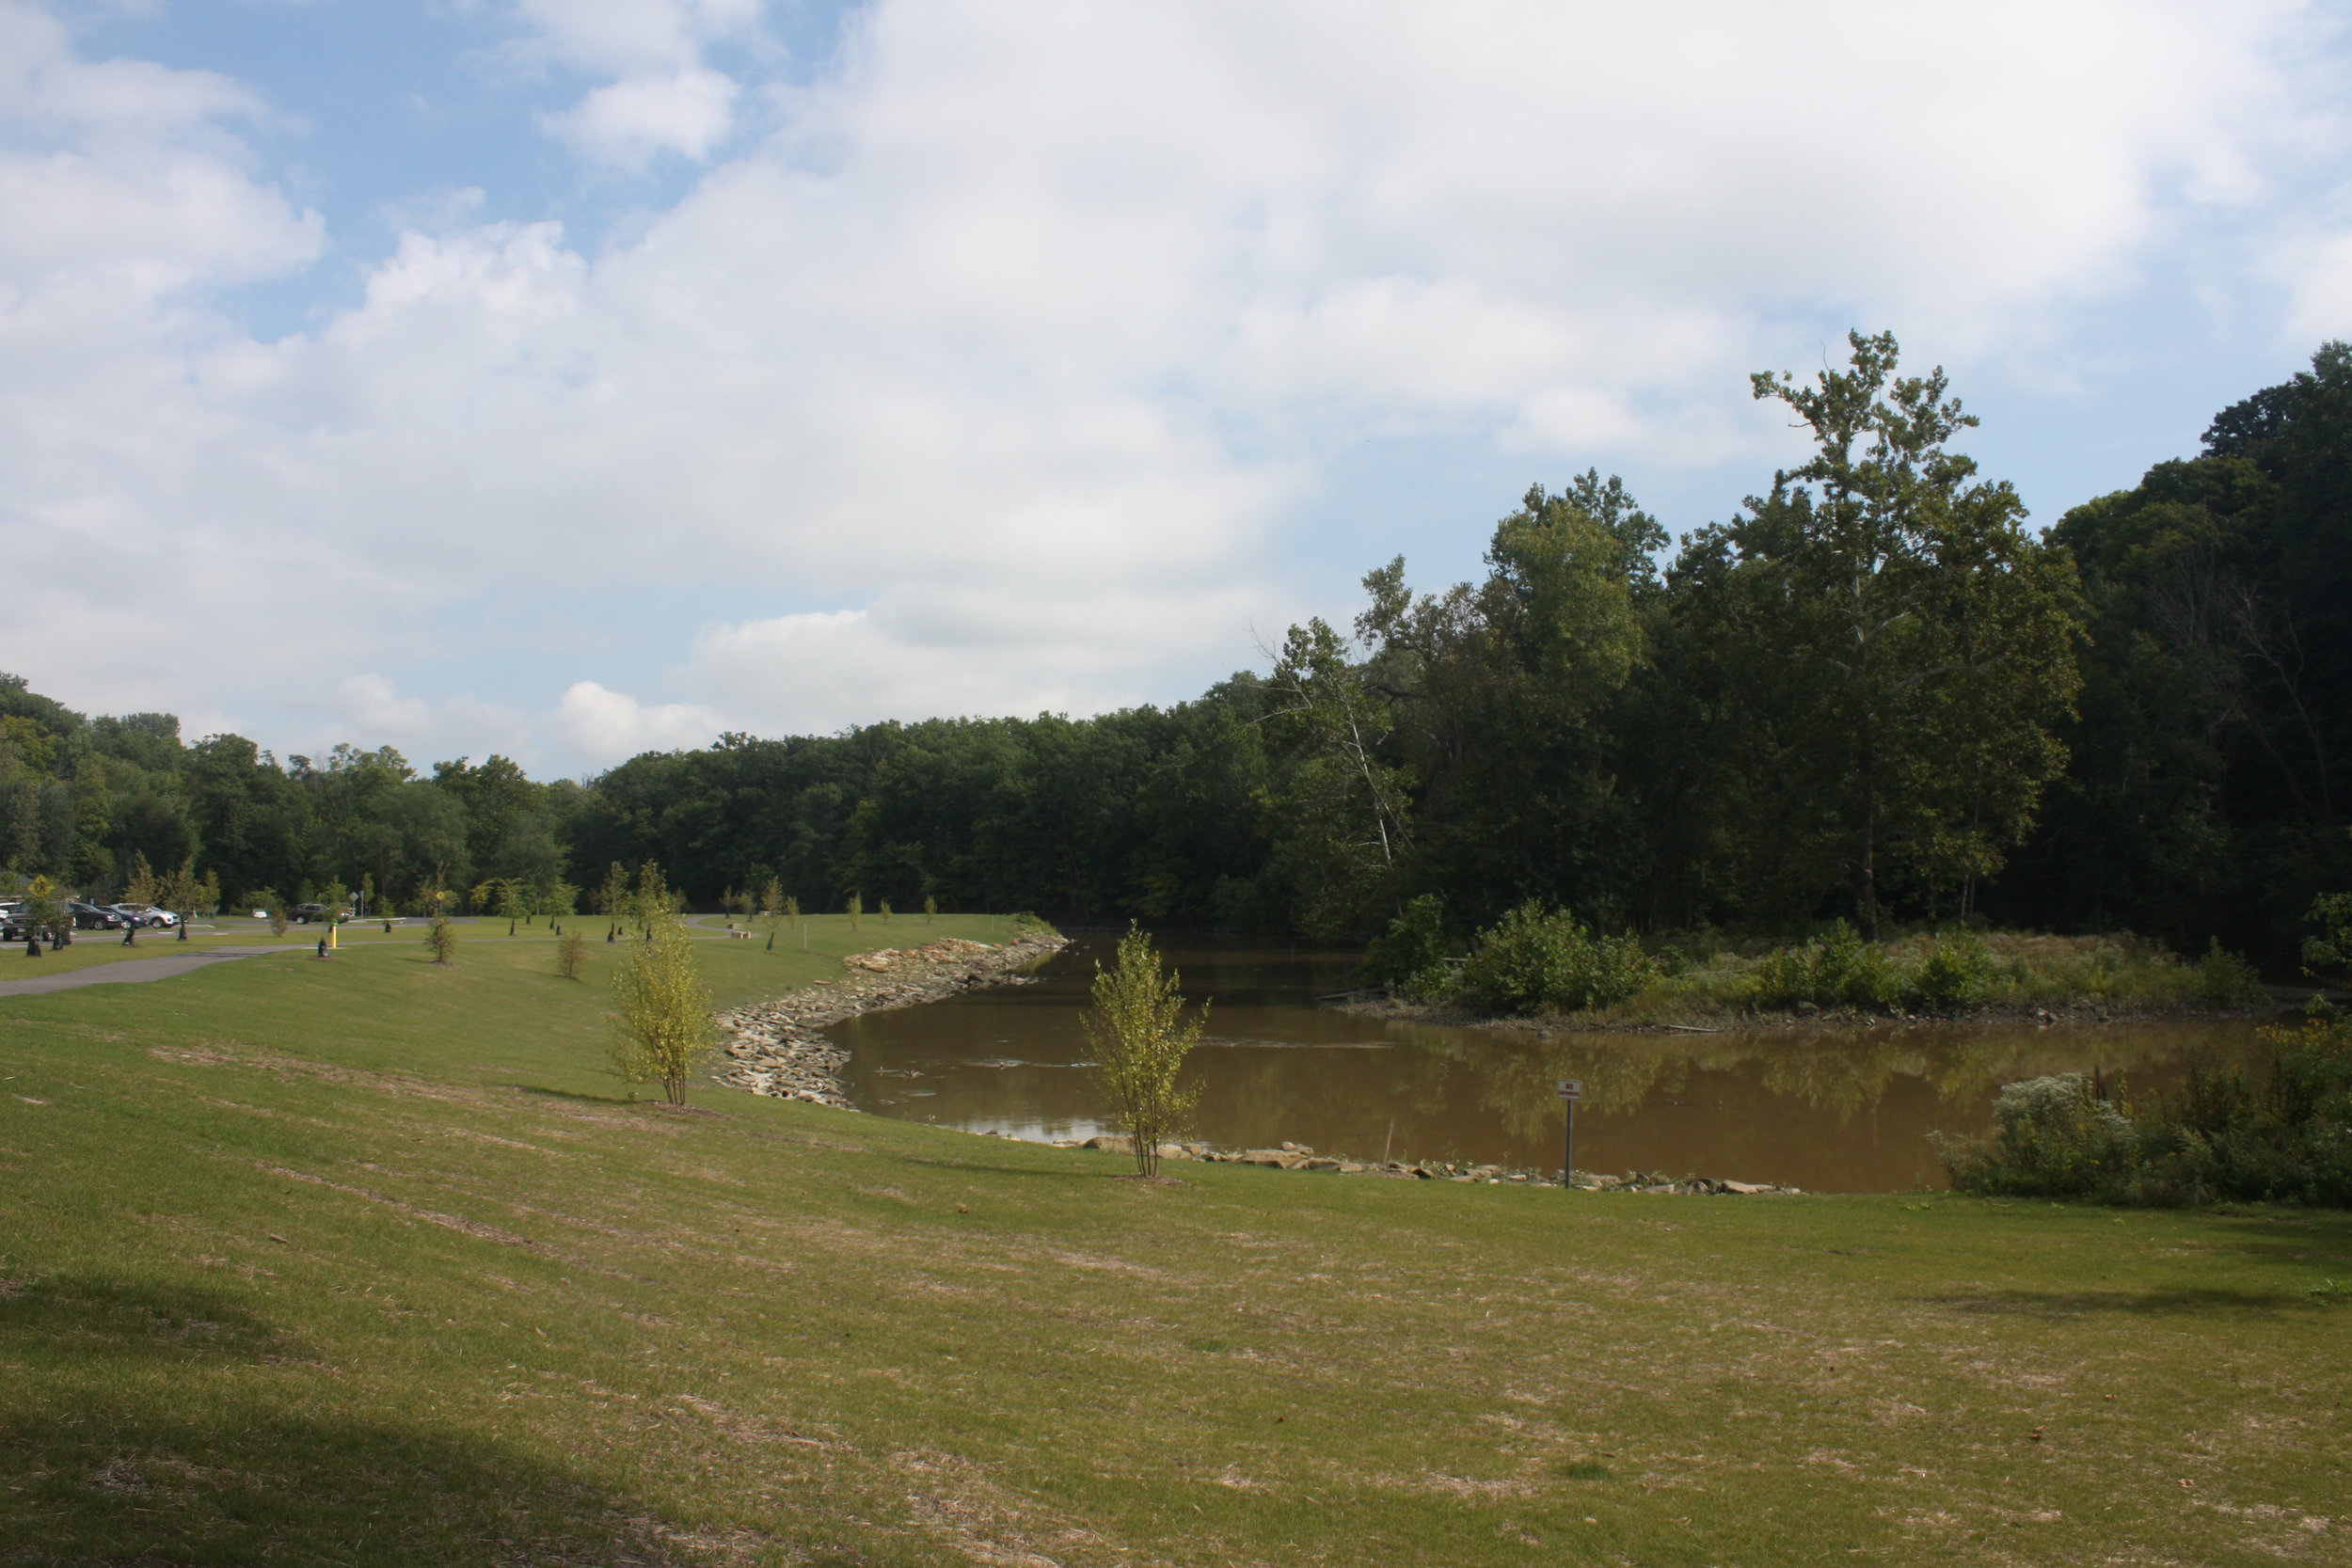 View of the Black River from the main park entrance area (looking northeast)